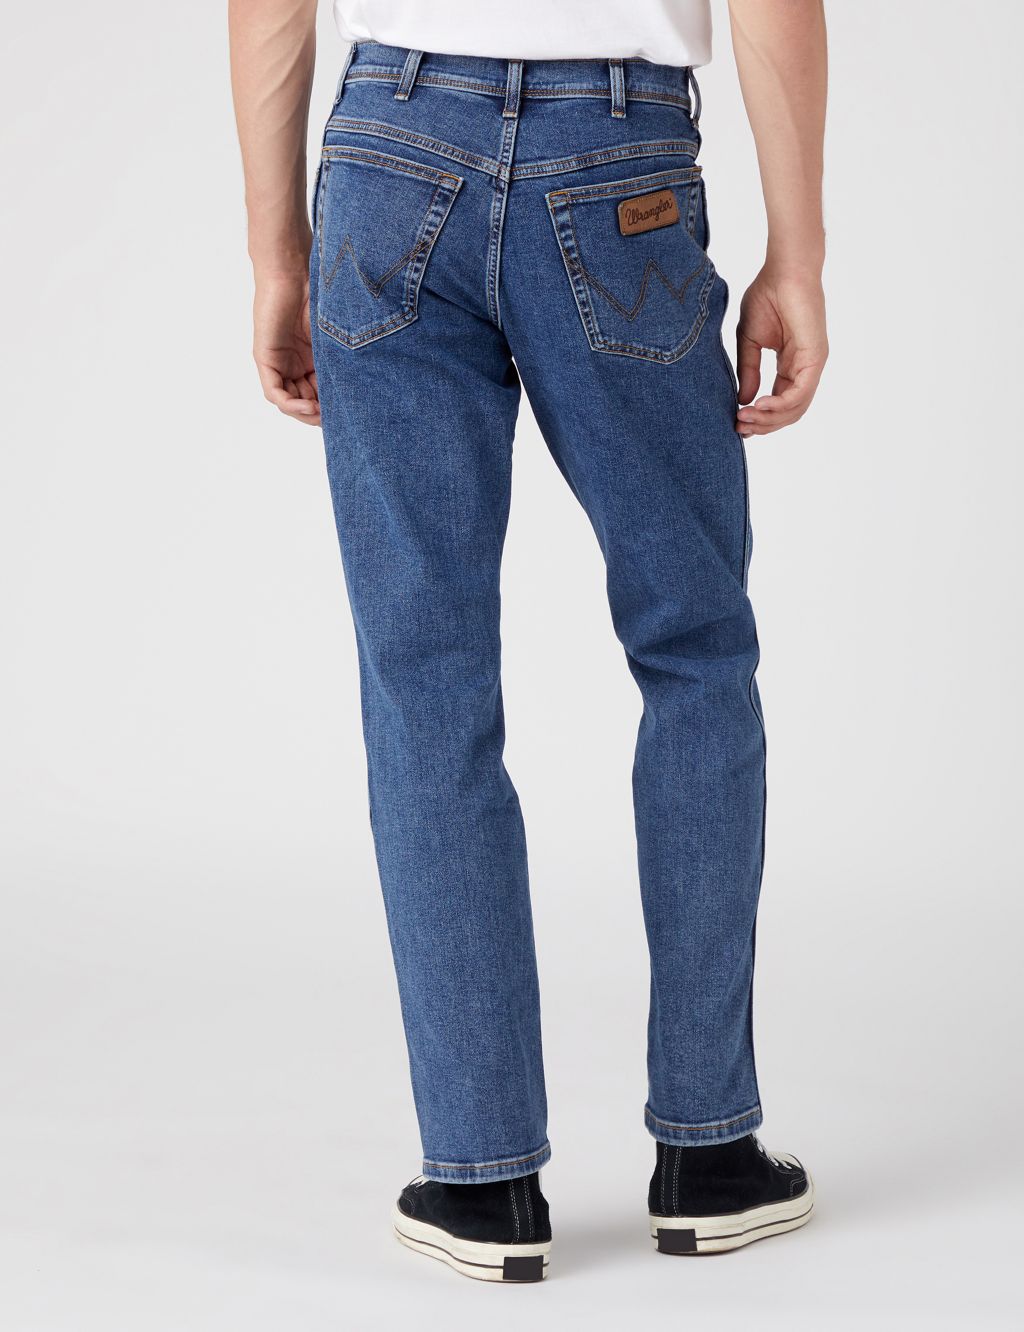 Texas Authentic Straight Fit 5 Pocket Jeans image 2